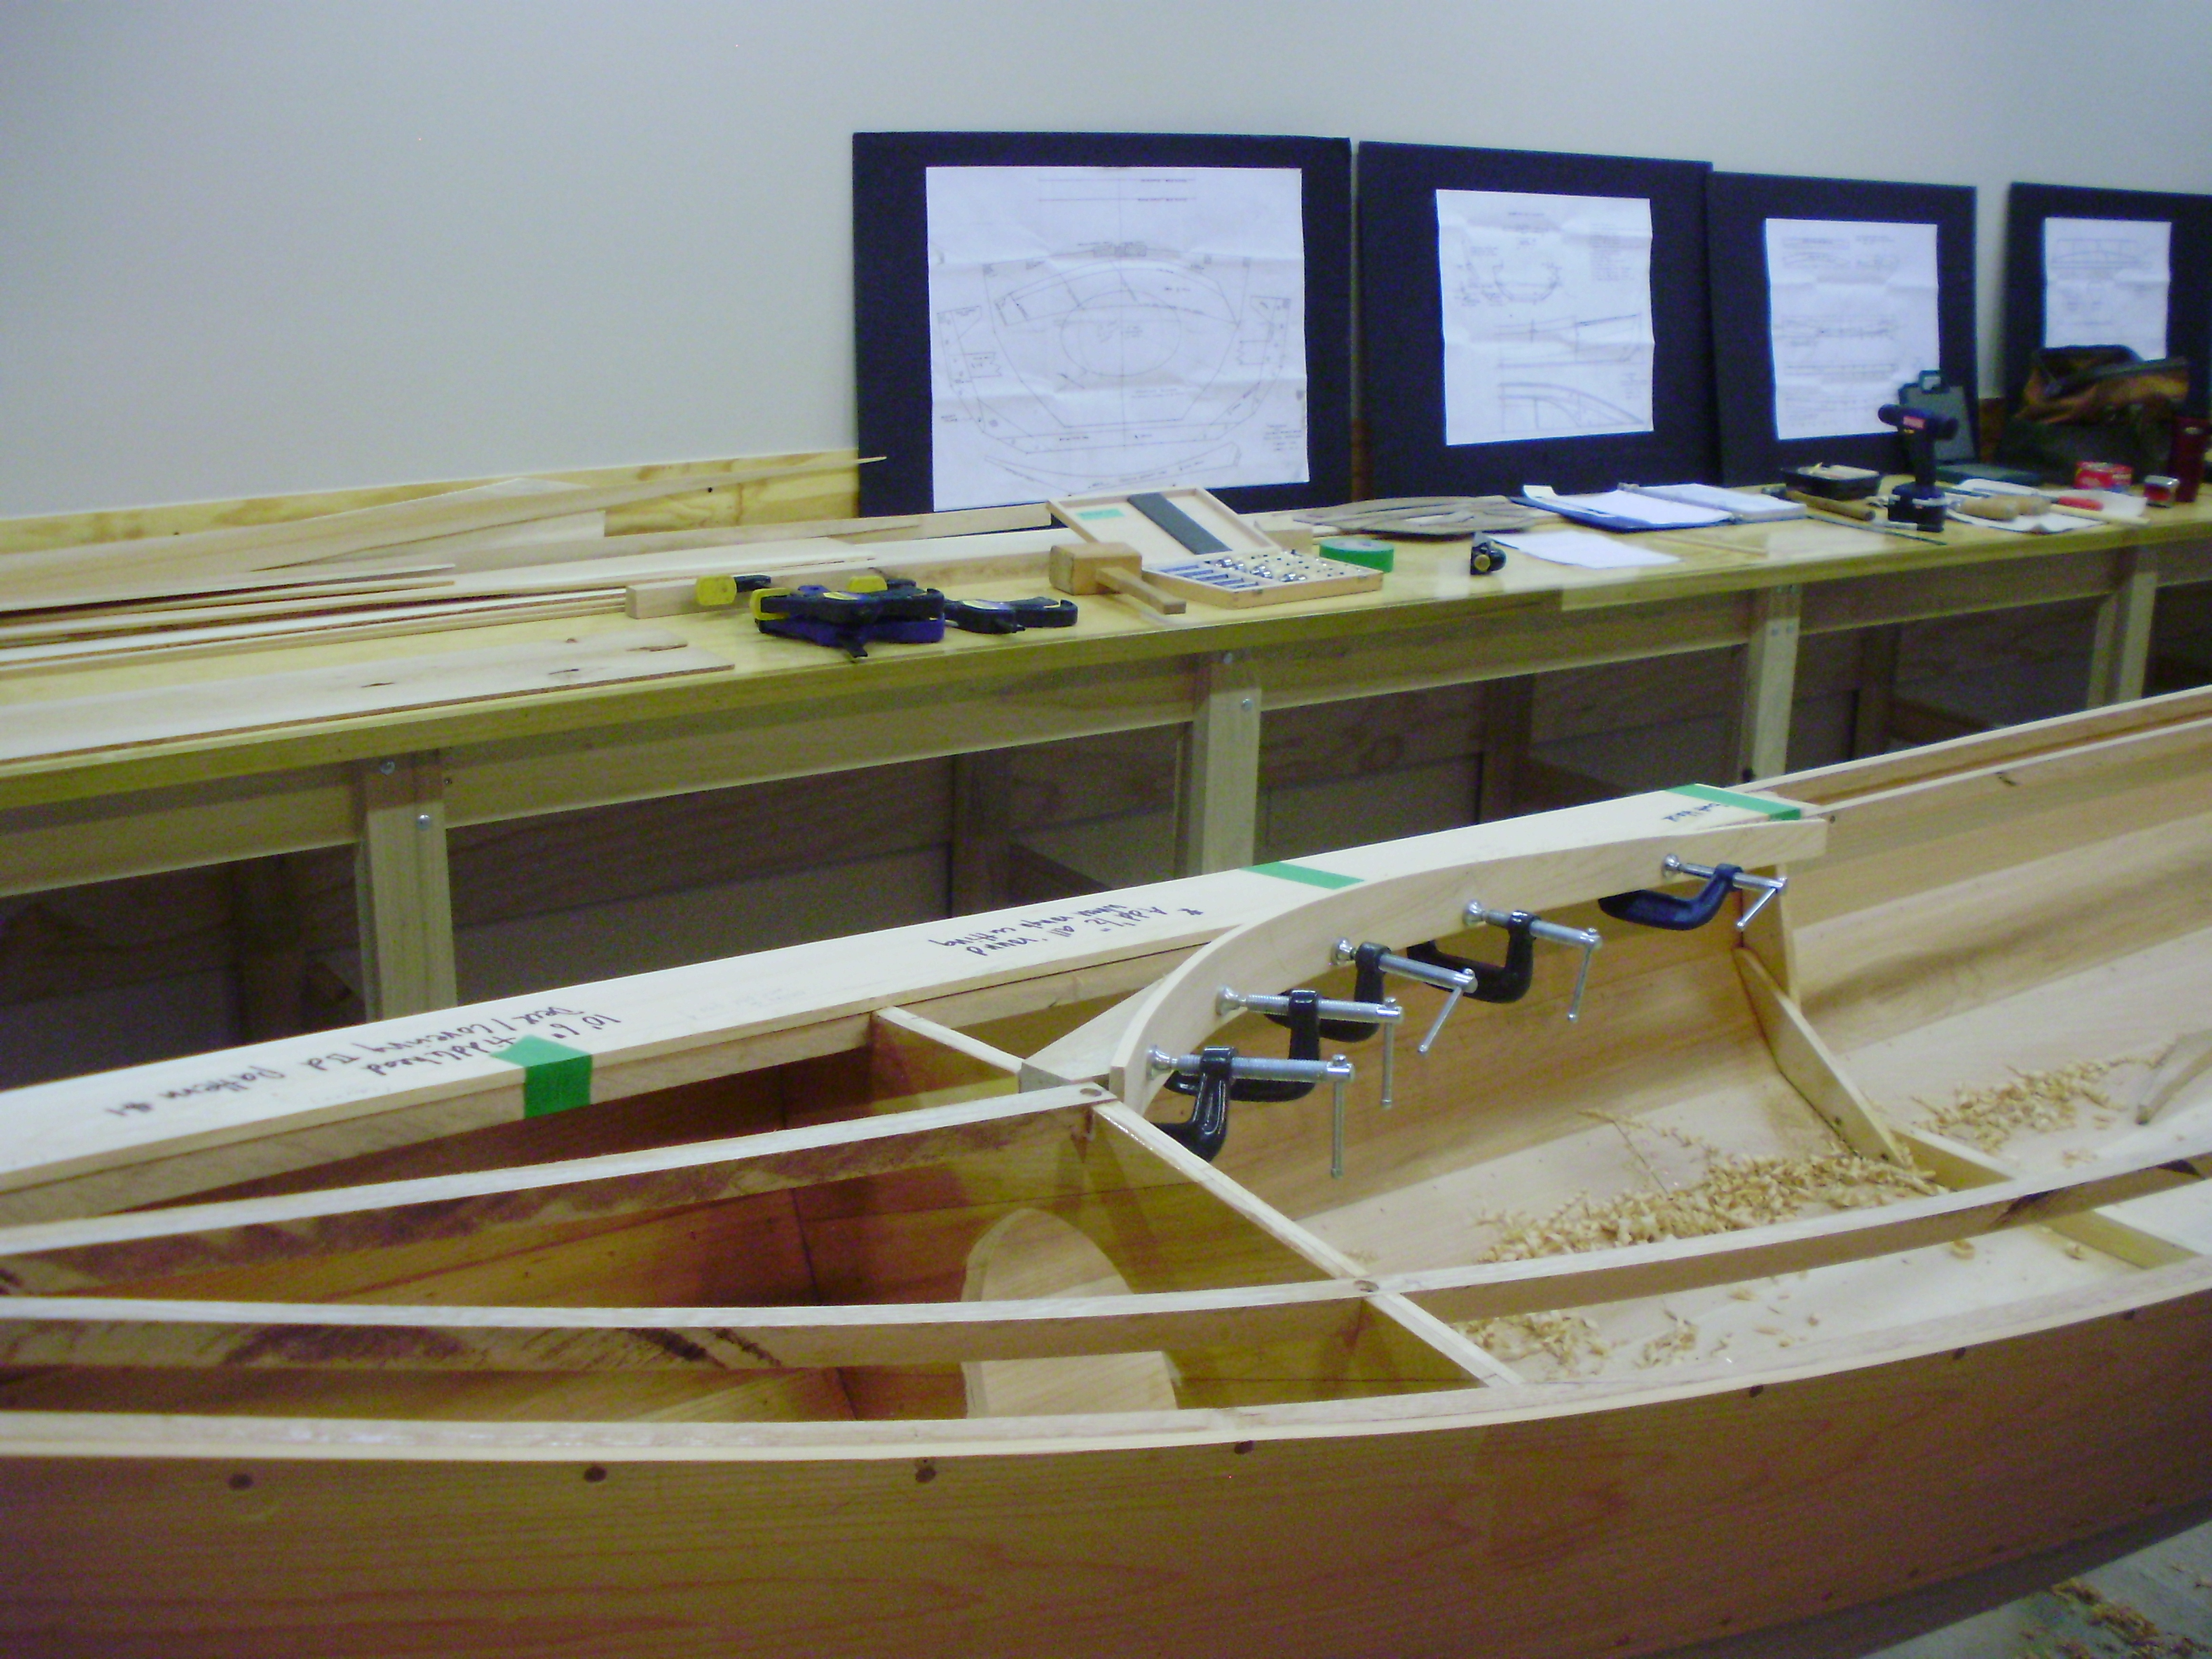 Building a Fiddlehead: Part 8 Playing With Boats